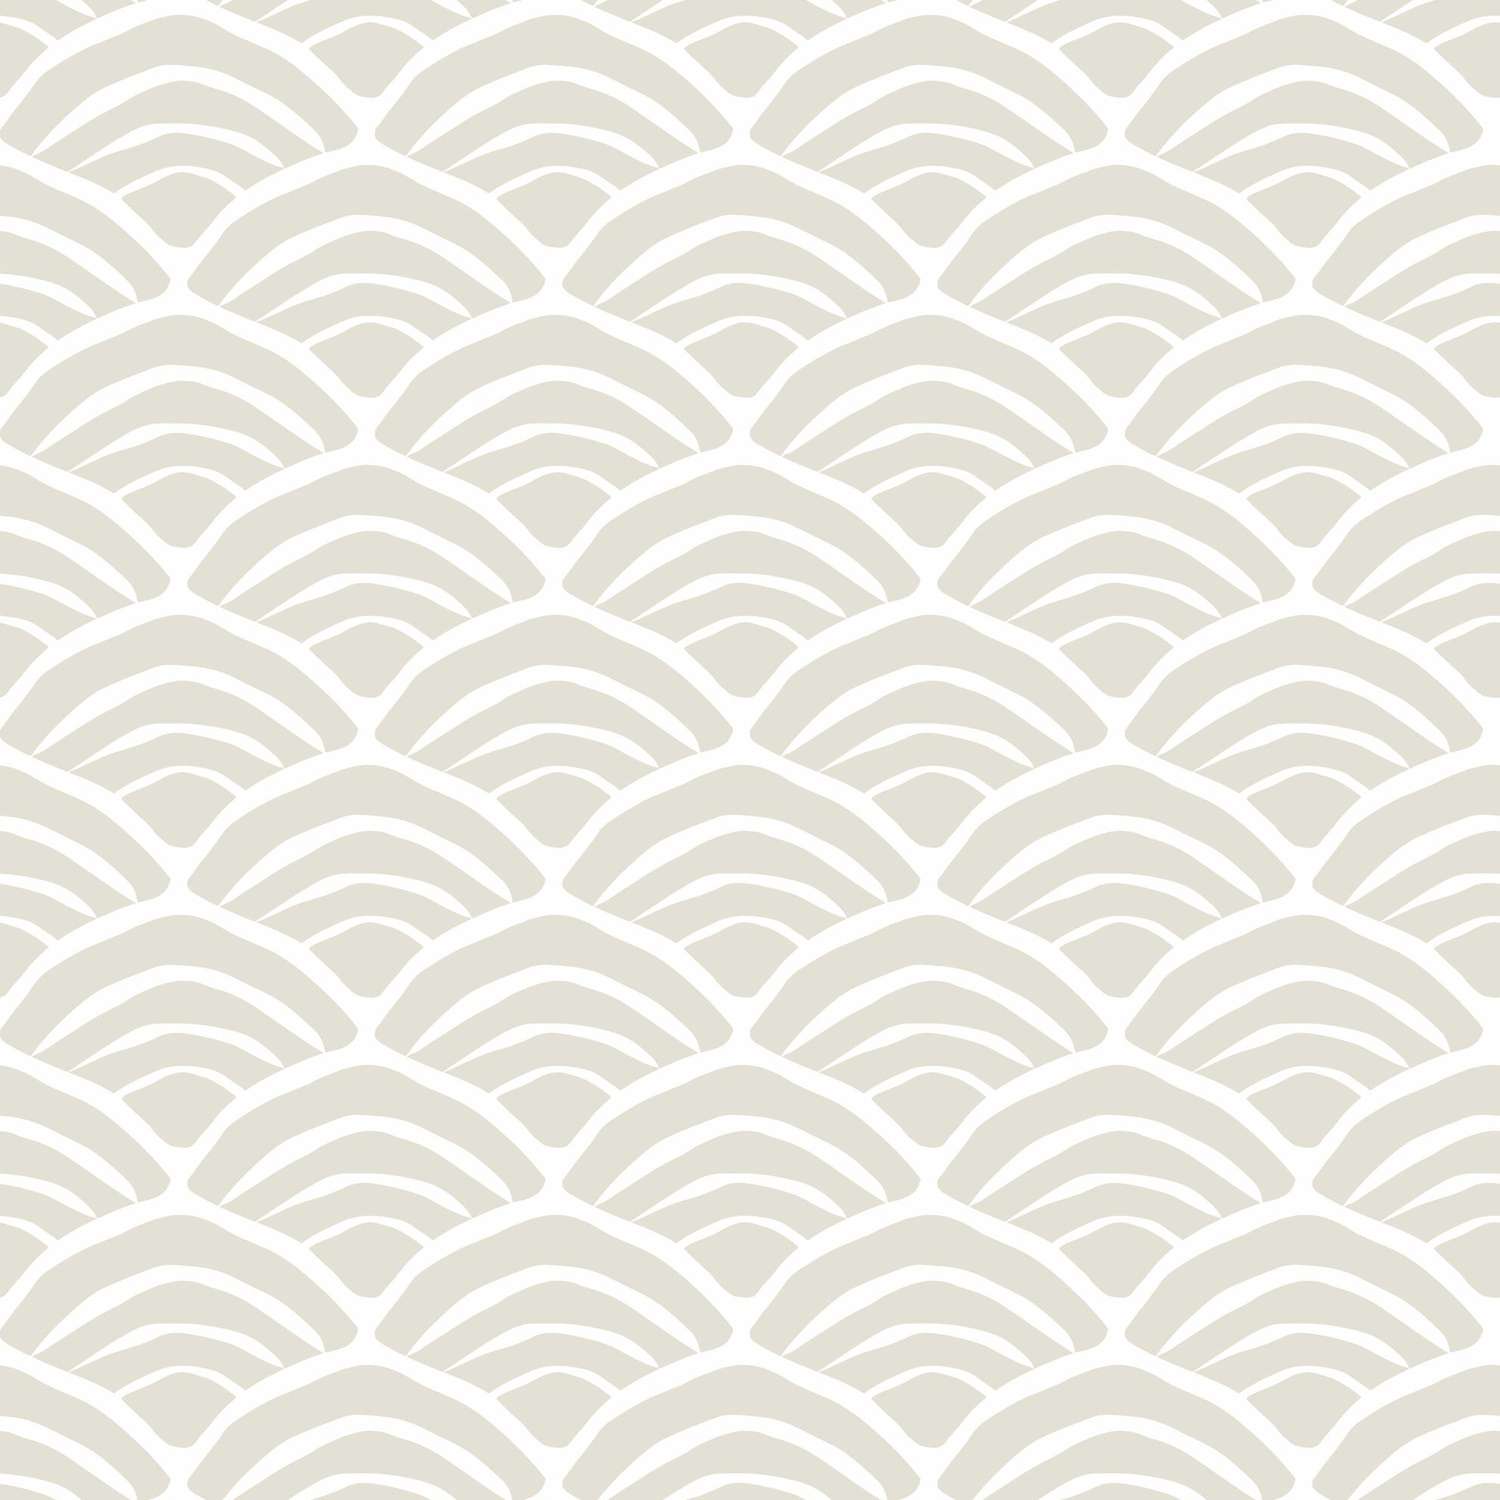 Scalloped peel and stick wallpaper.